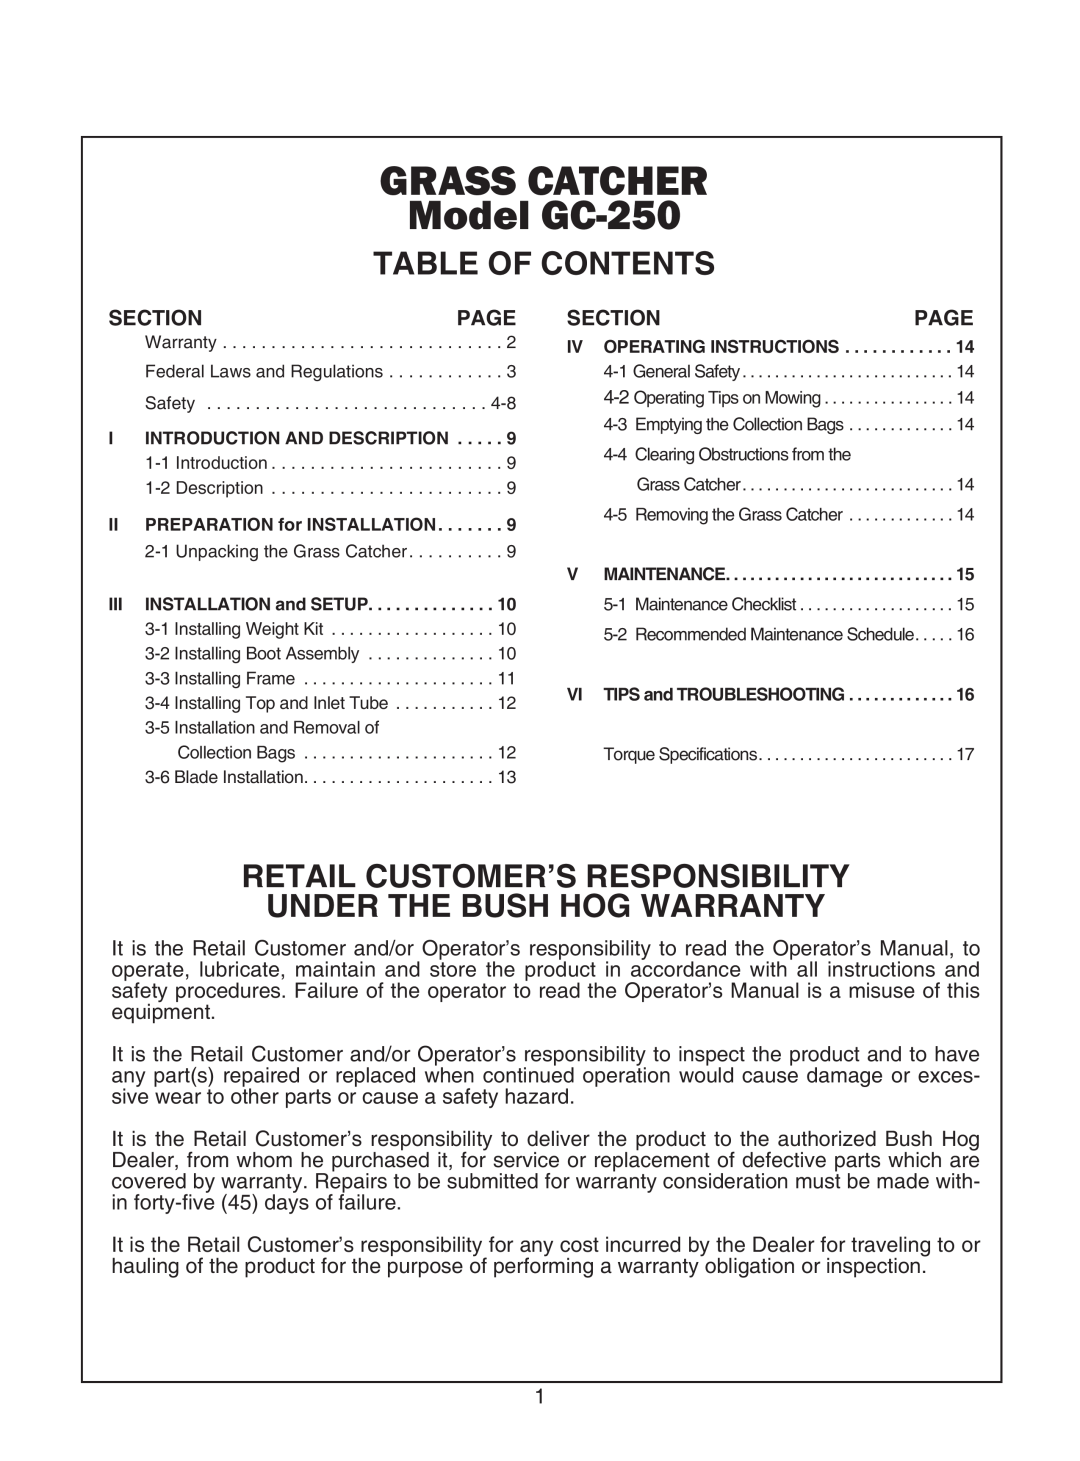 Bush Hog GC-250 manual Table Of Contents, Retail Customer’S Responsibility, Under The Bush Hog Warranty, Section, Page 